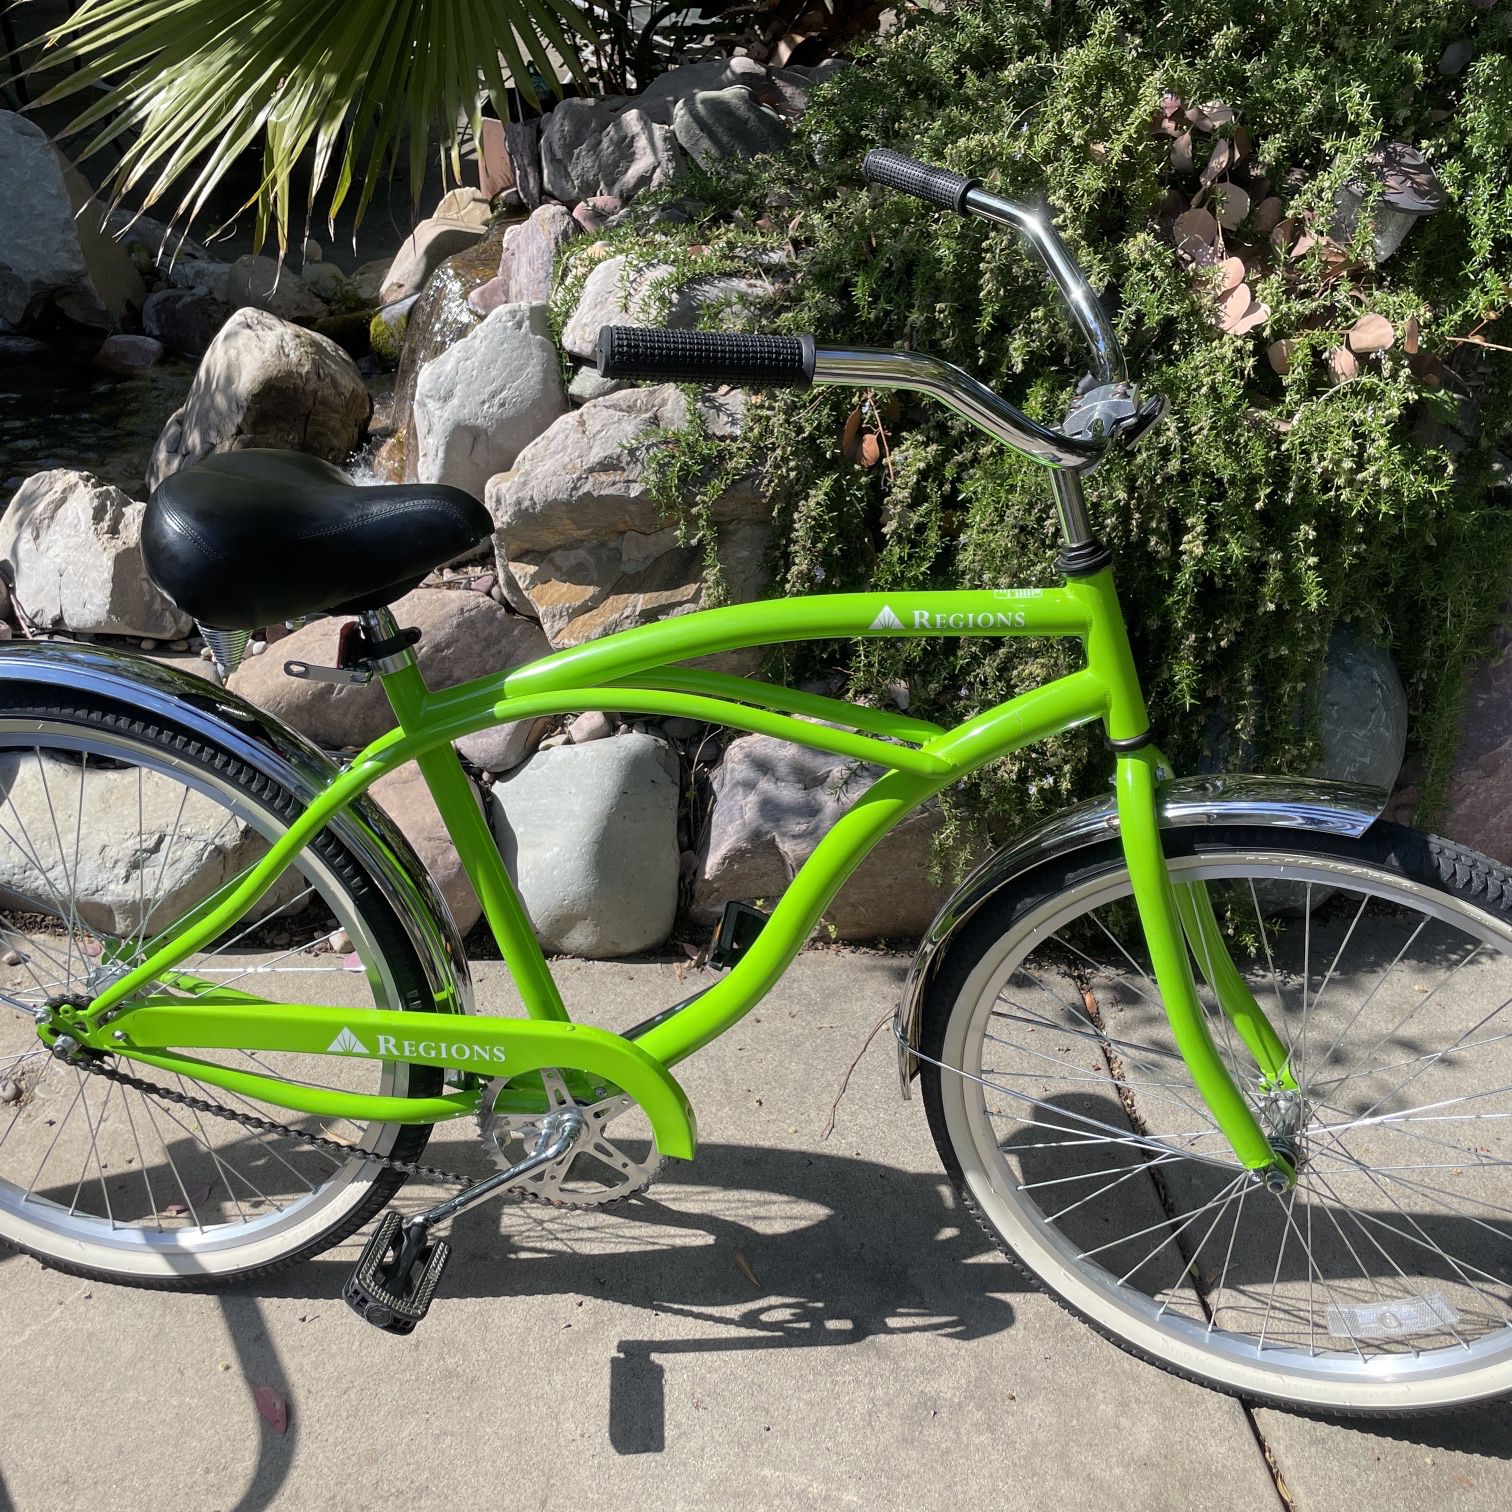 Regions Cruiser Bike, Single speedm Bicycle, coaster brake, Very Good Condition , Delivery Available.